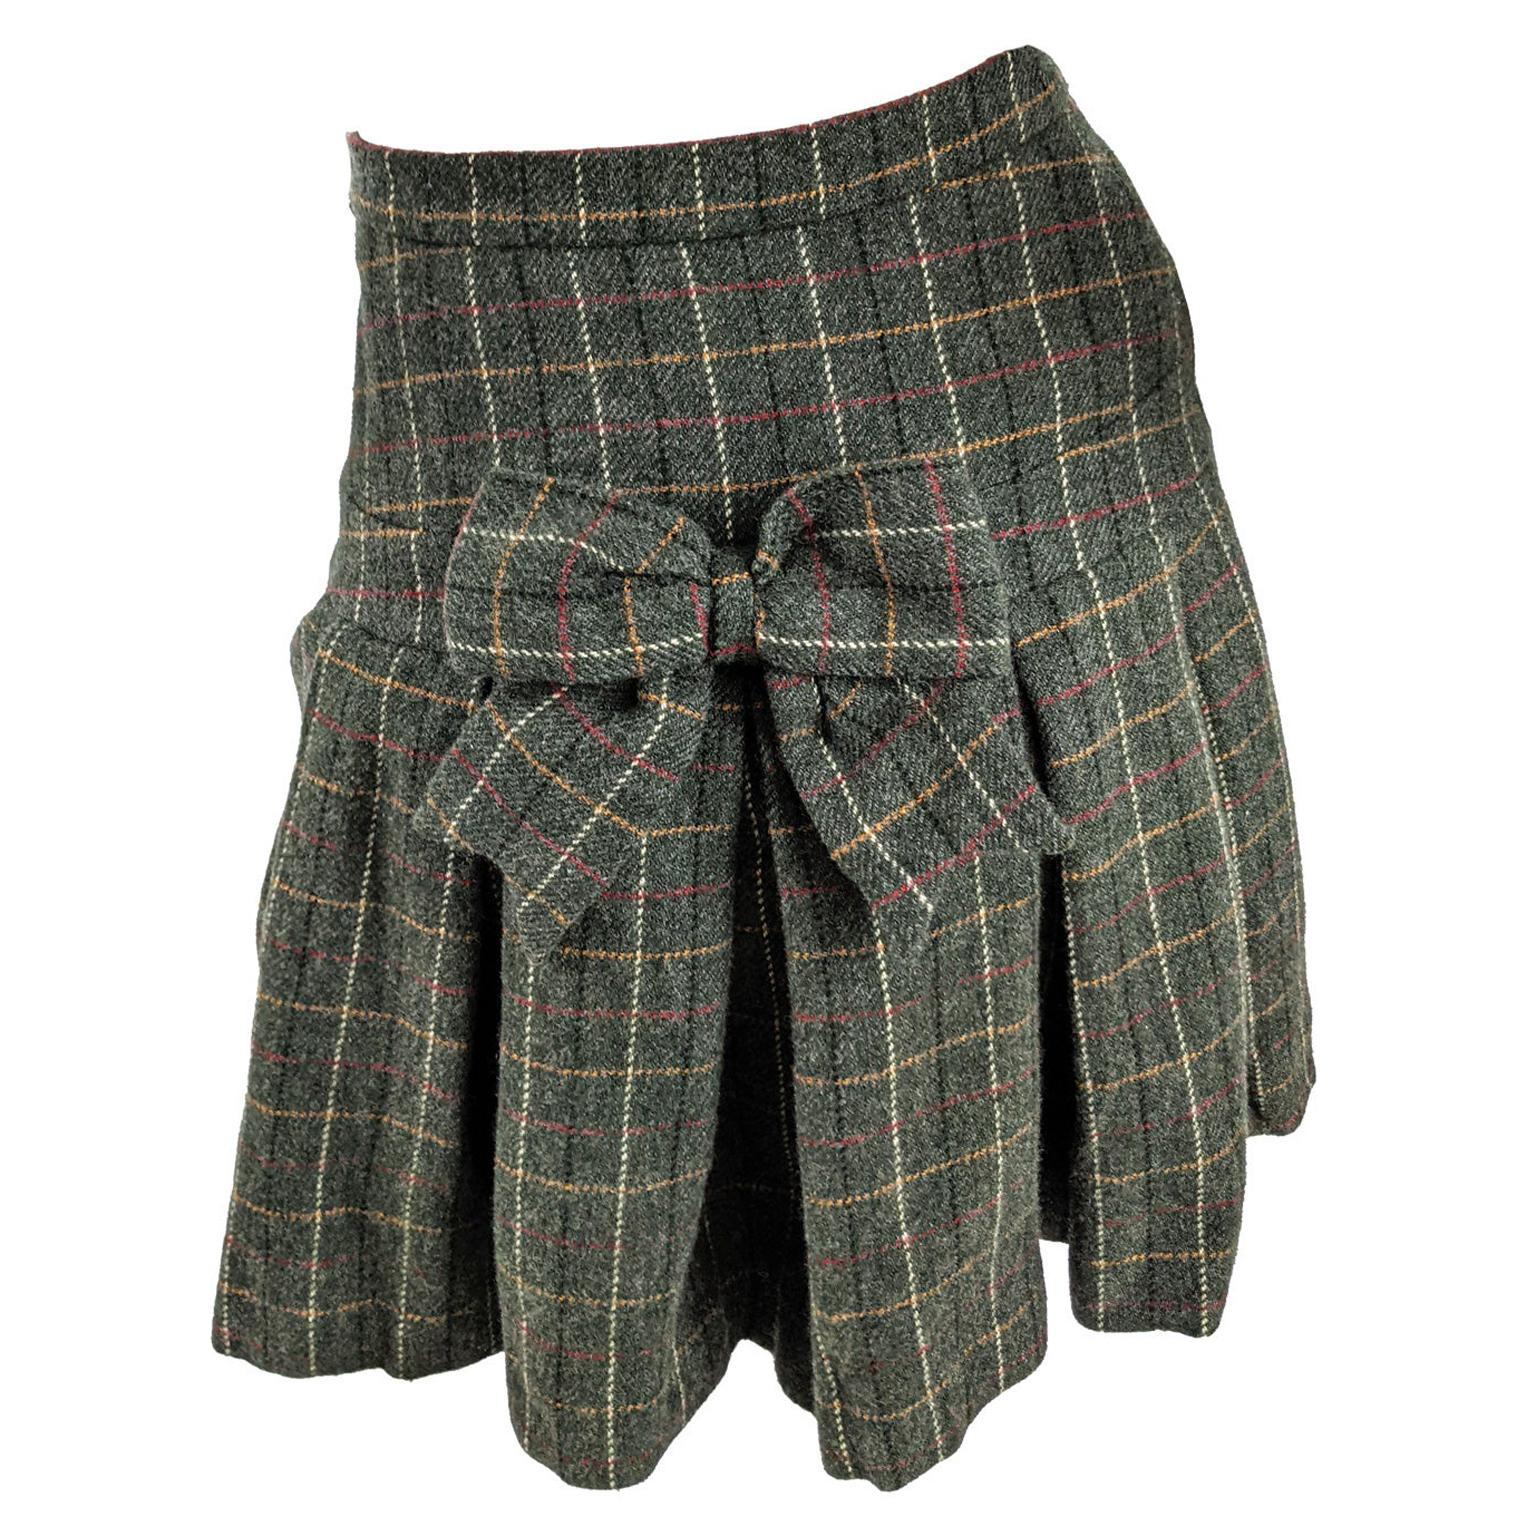 Moschino Vintage Green Wool Plaid Skirt with Pleated Bustle Bow Back